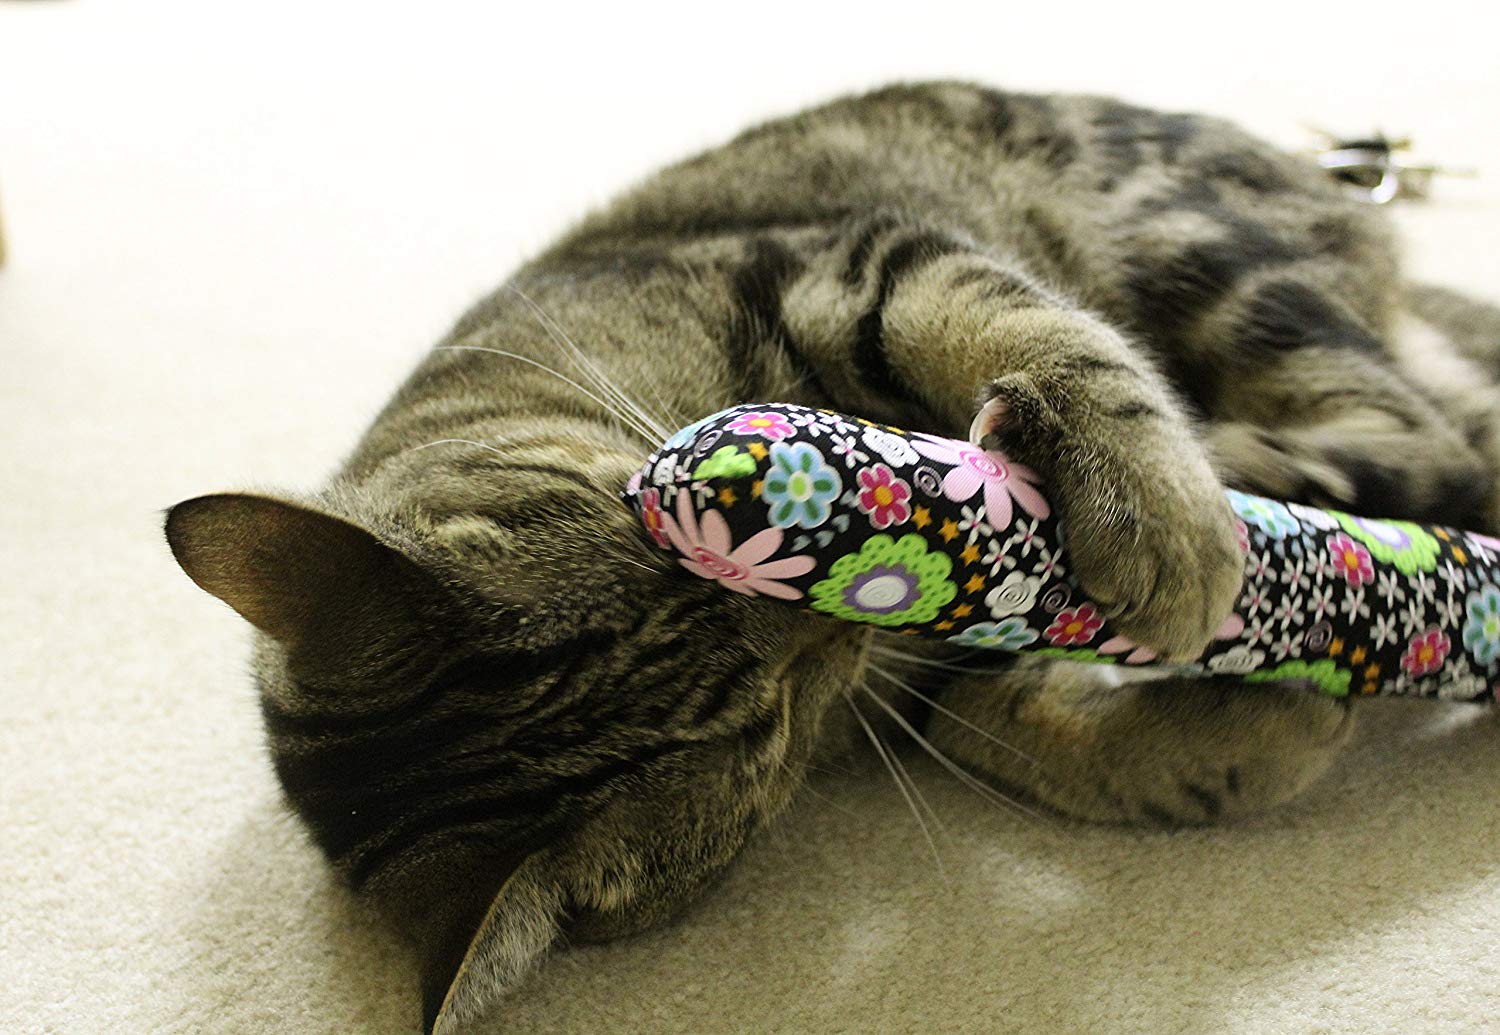 and lots and lots of cat nip! JUMBO Catnip kicker toy Stuffed with upcycled fabric scraps